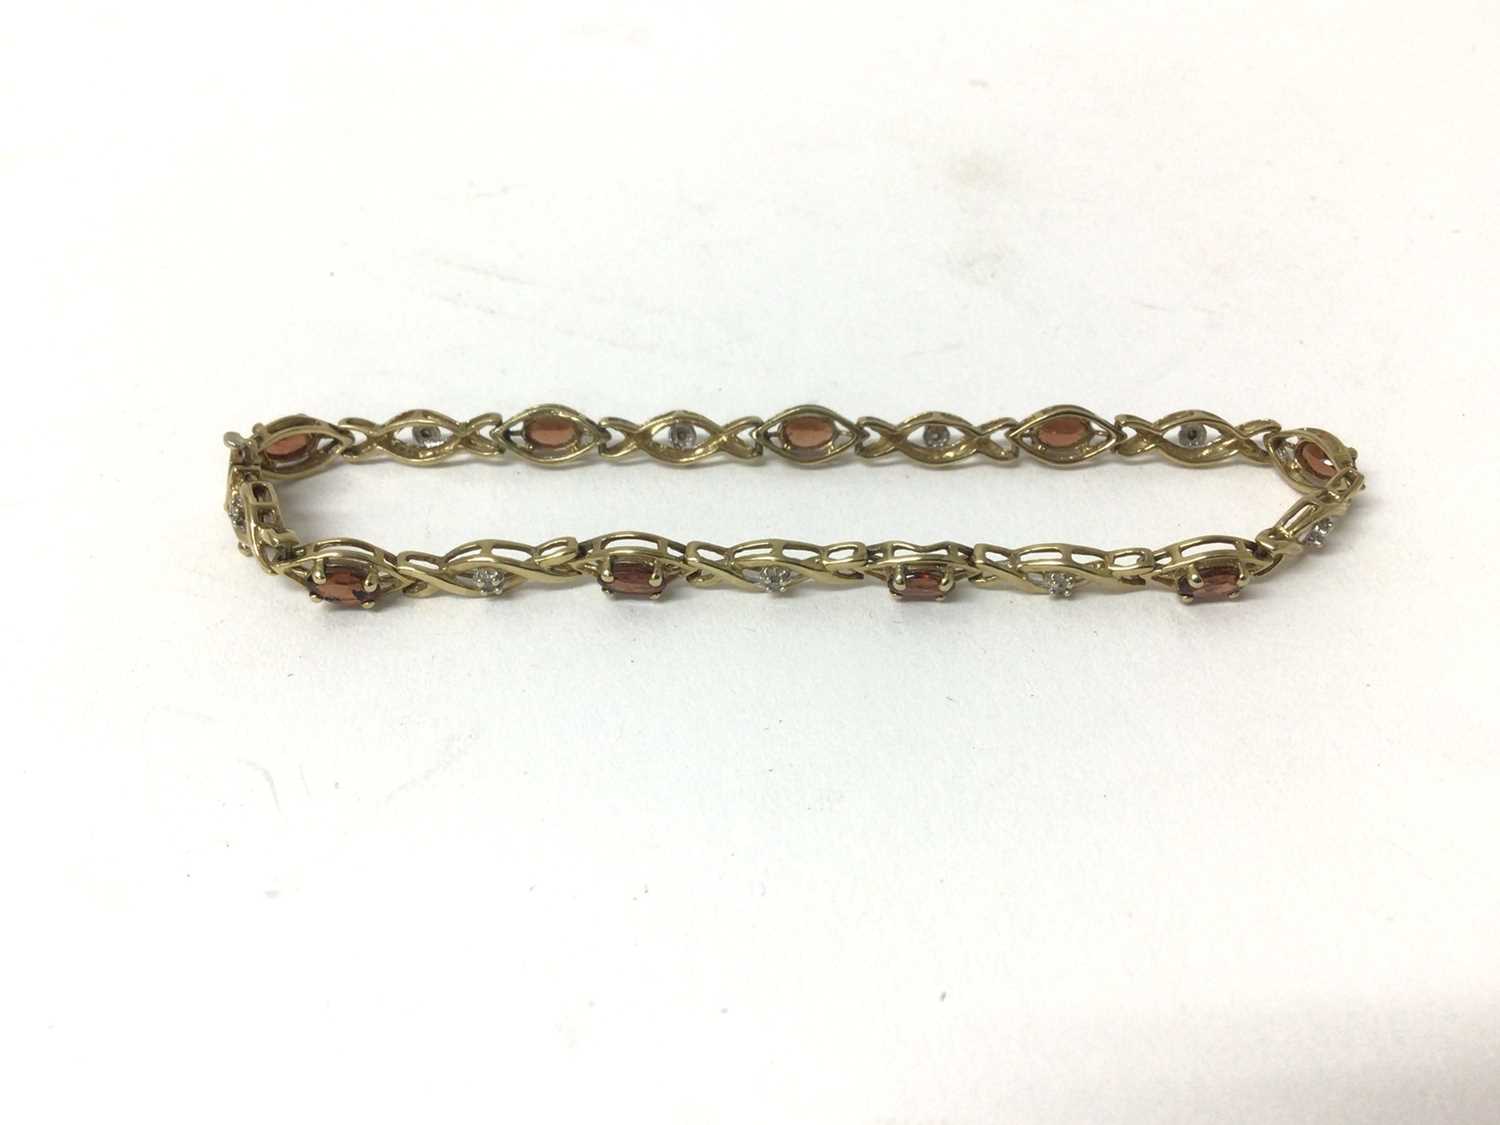 Lot 214 - Garnet and diamond bracelet with a line of oval cut garnets and single cut diamonds in 9ct gold setting, 18.5cm length.